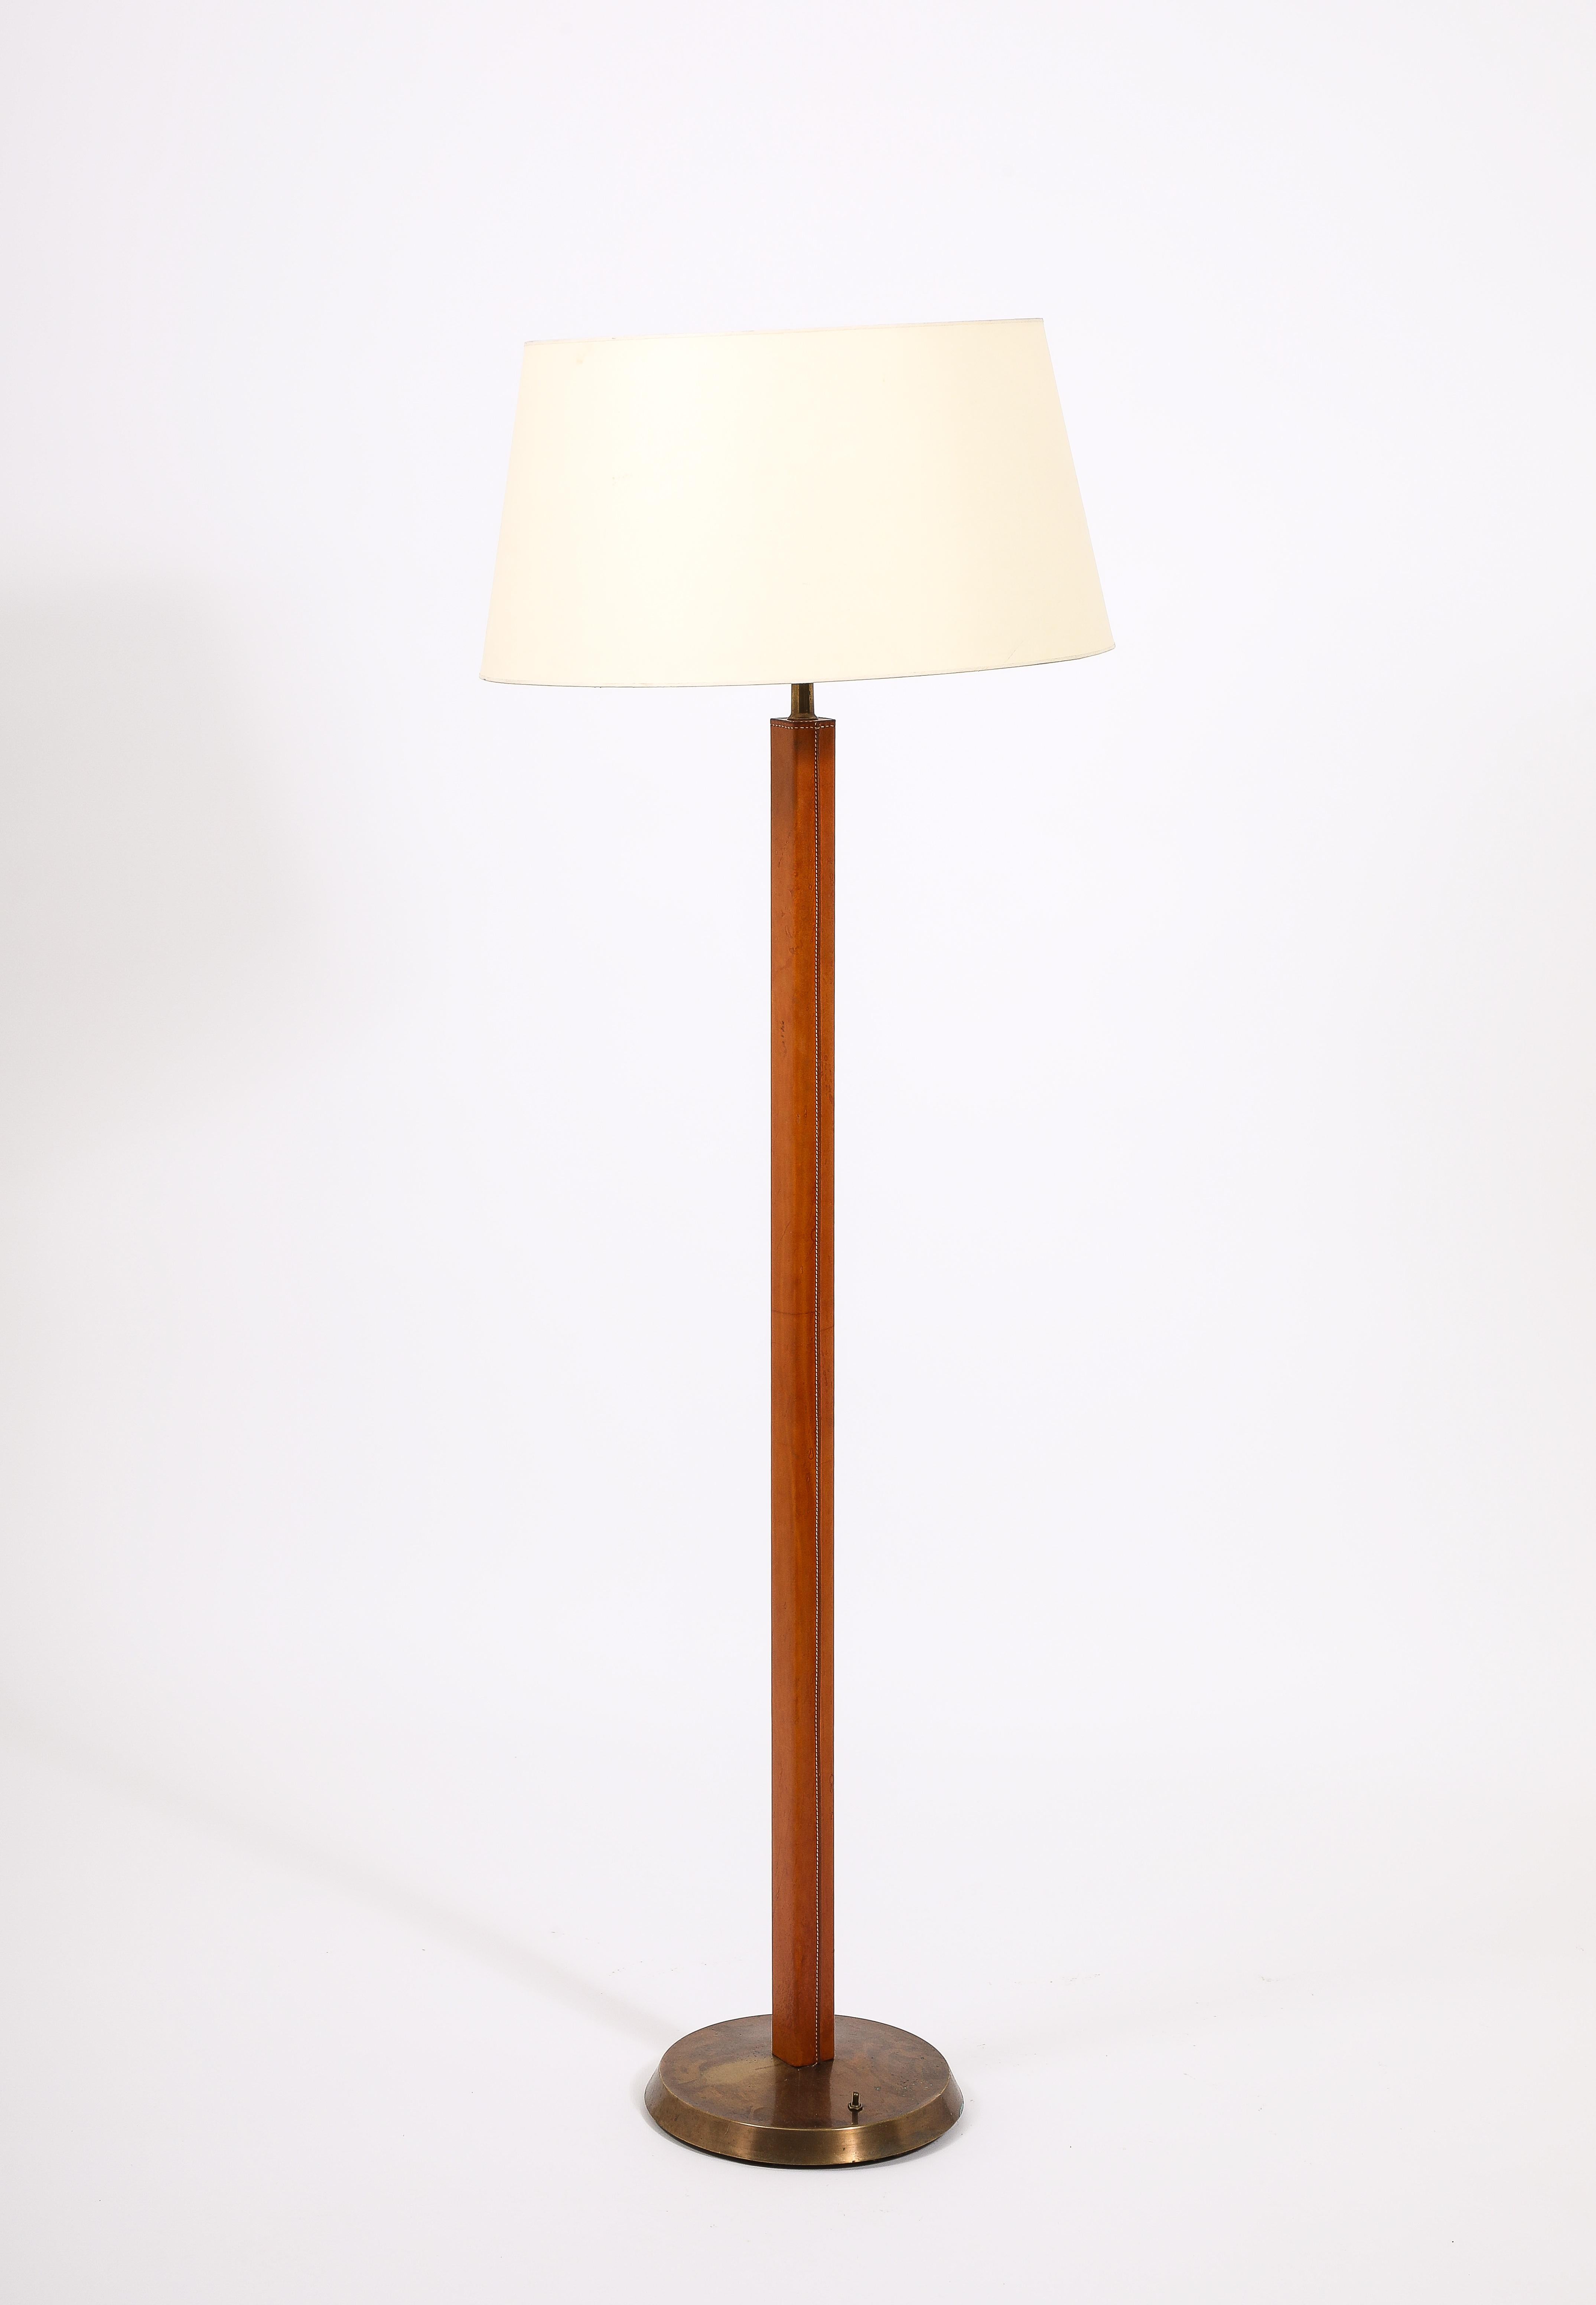 Elegant floor lamp in brass, the large square stem wrapped in a rich tobacco colored leather. Base is 9